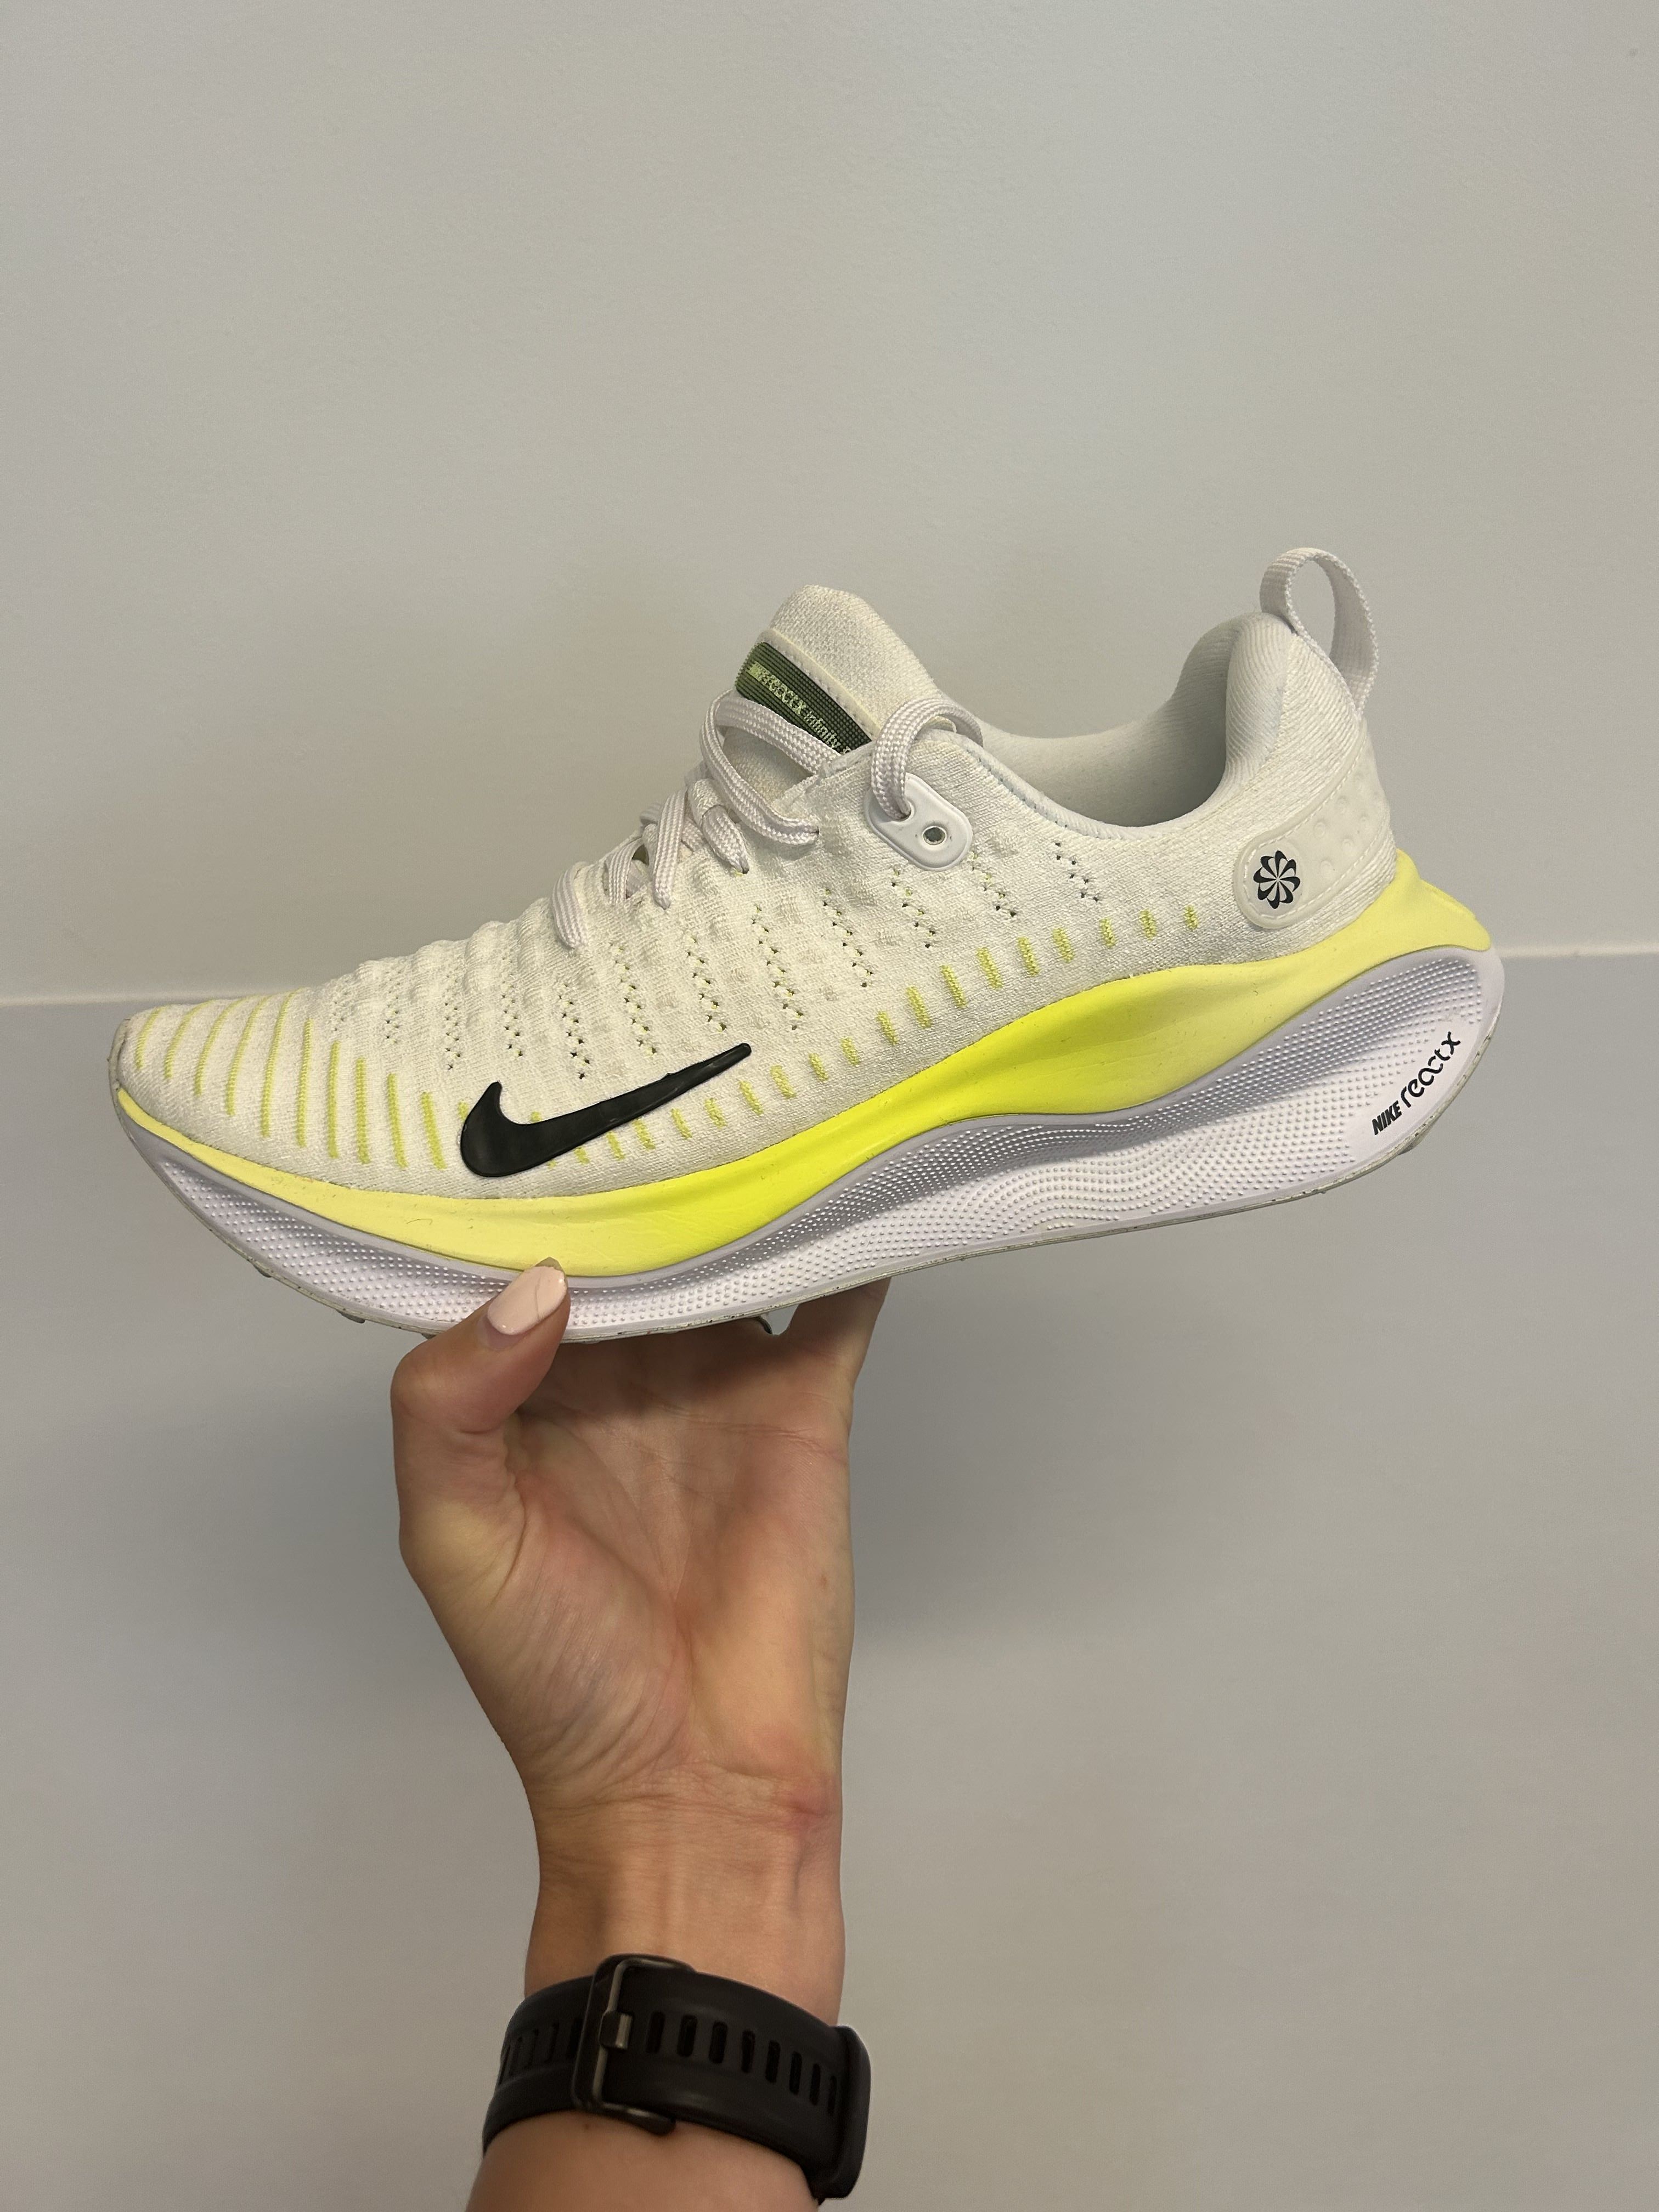 Nike React Infinity Run Flyknit 4: Tried and tested